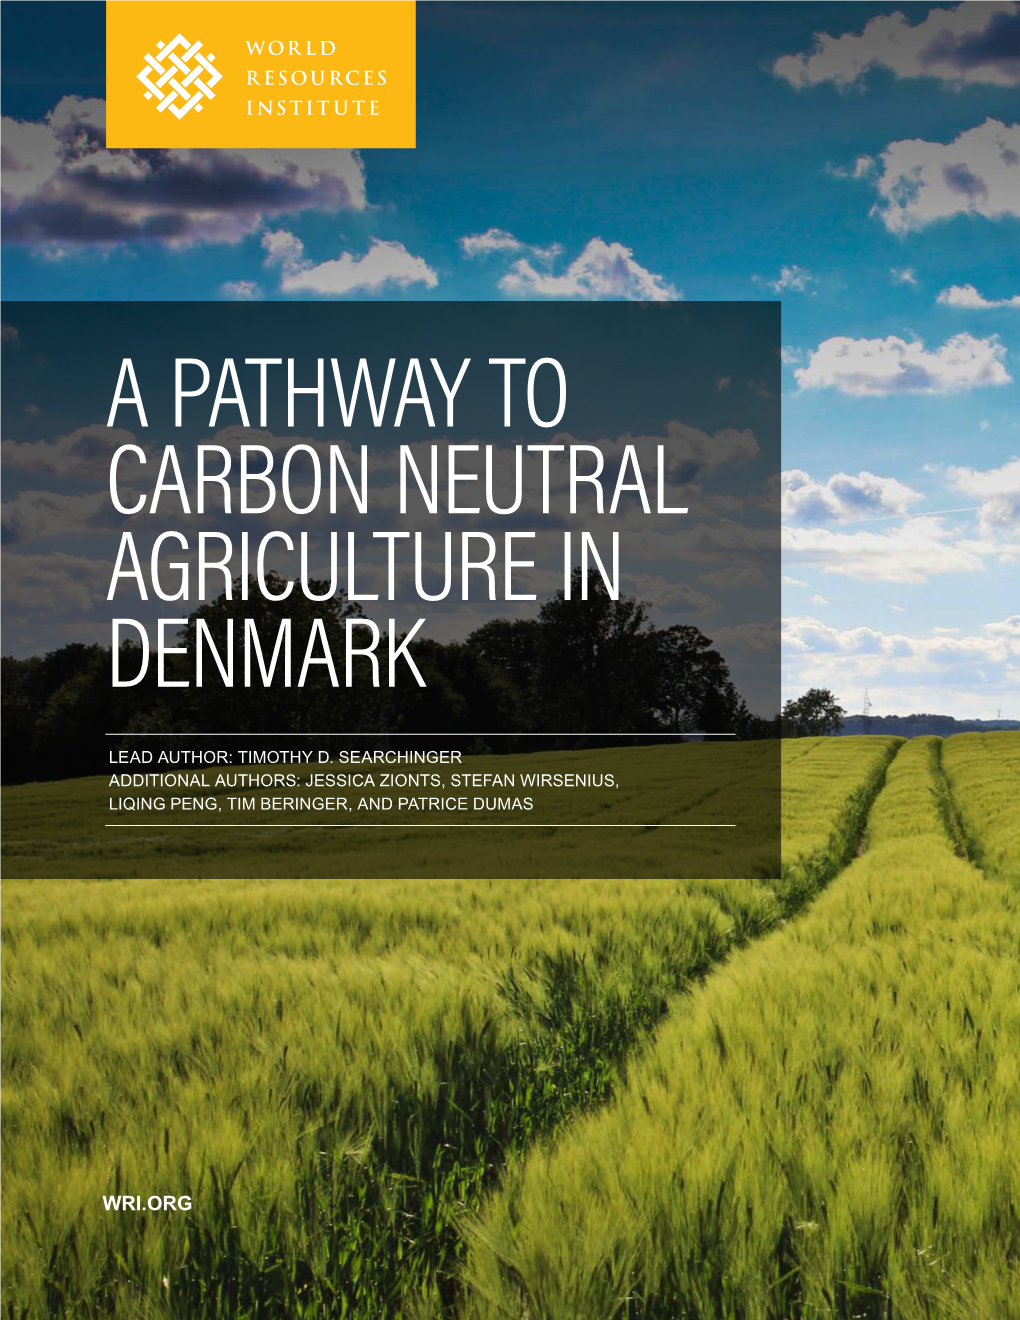 A Pathway to Carbon Neutral Agriculture in Denmark